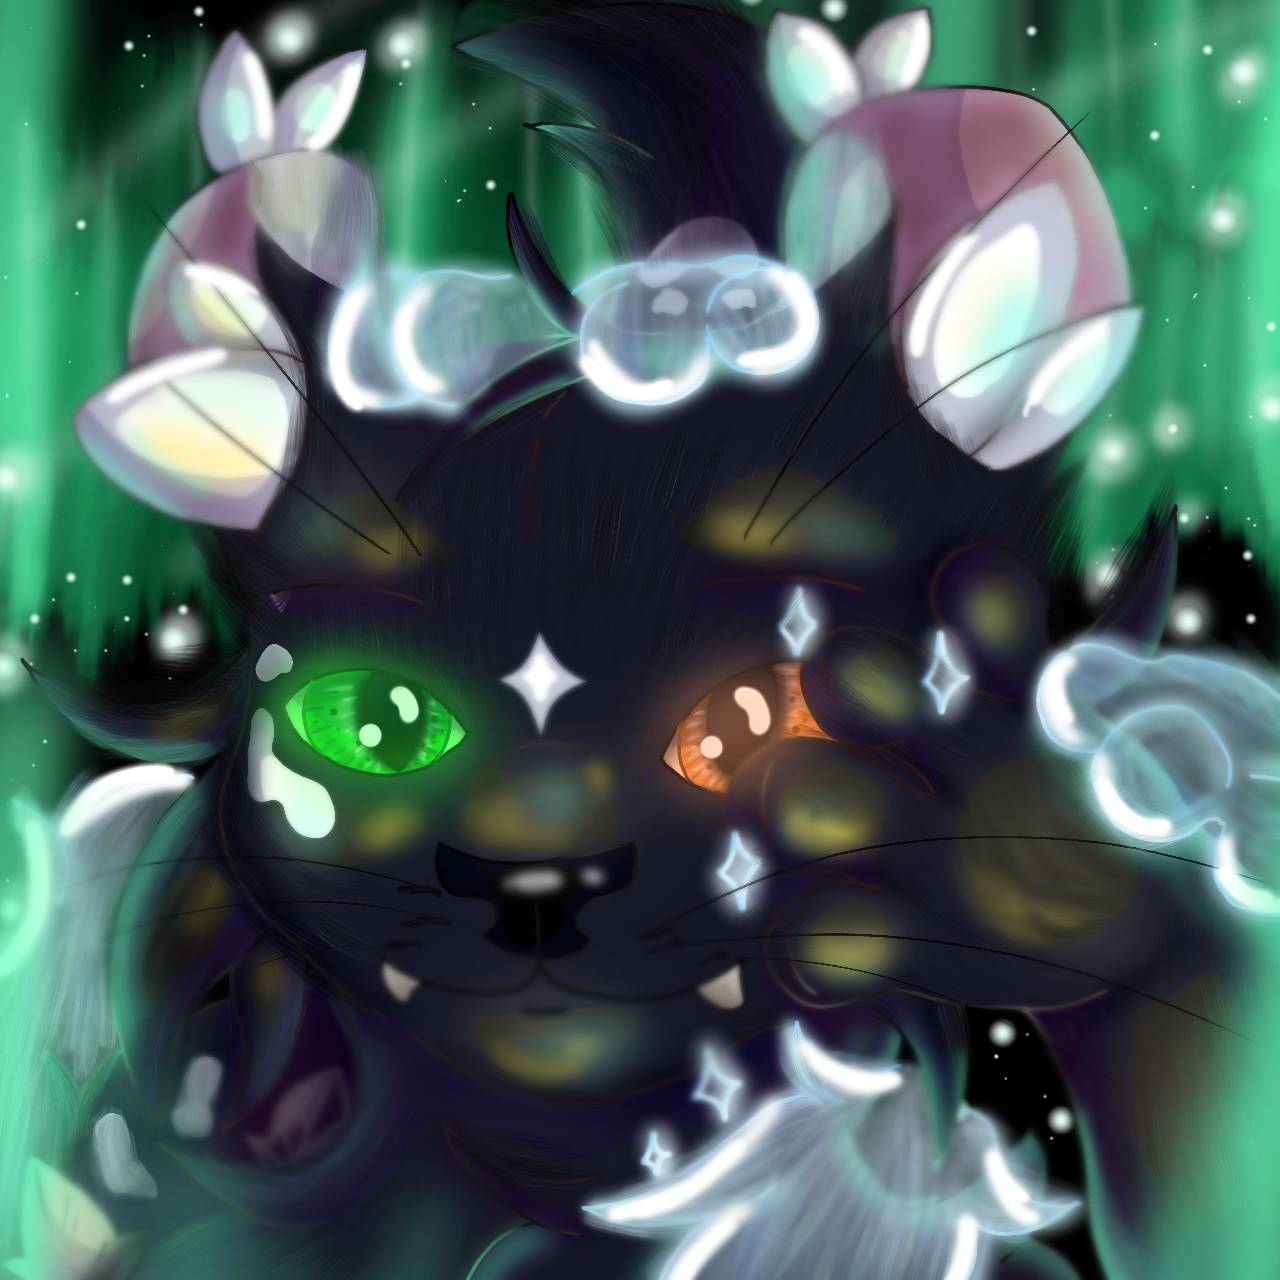 Scourge and Tiny  Warrior cats art by starzysunset on DeviantArt